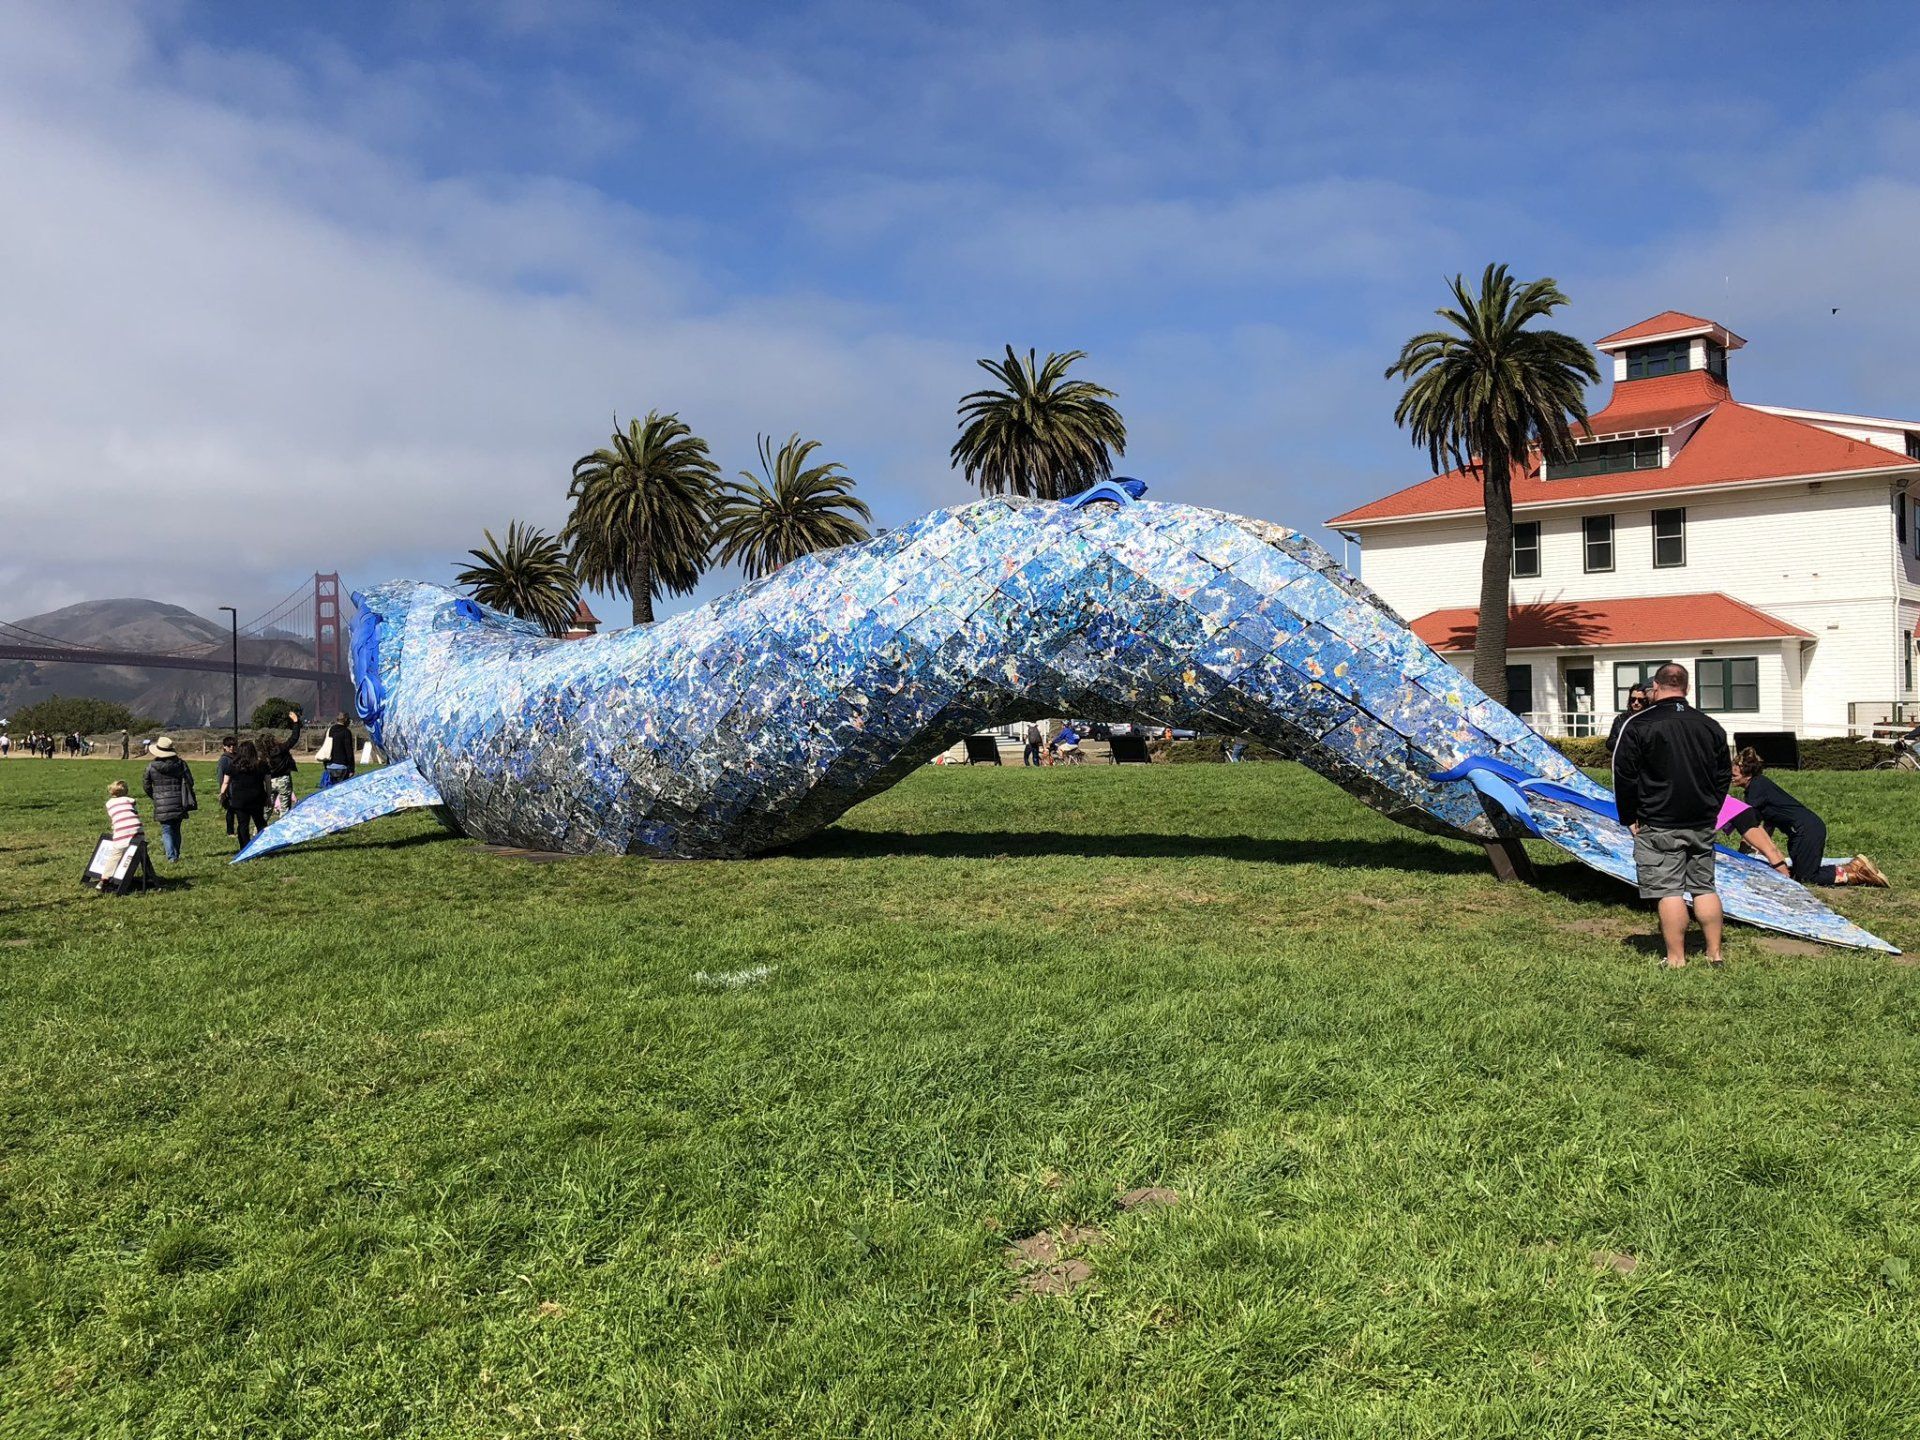  A life-size whale sculpture, located at the Monterey Bay Aquarium in San Francisco, was made to highlight the issue of ocean pollution and the amount of  plastic that gets dumped into the sea, is made up of recycled materials  such as plastic bottles, re-used toys and milk jugs;  it has measurements of 84 feet, 11.6 inches long; 26 feet, 5.8  inches wide and reaches a height of 13 feet, 9.6 inches tall, setting the world record for the Largest Recycled Plastic Sculpture (Supported).